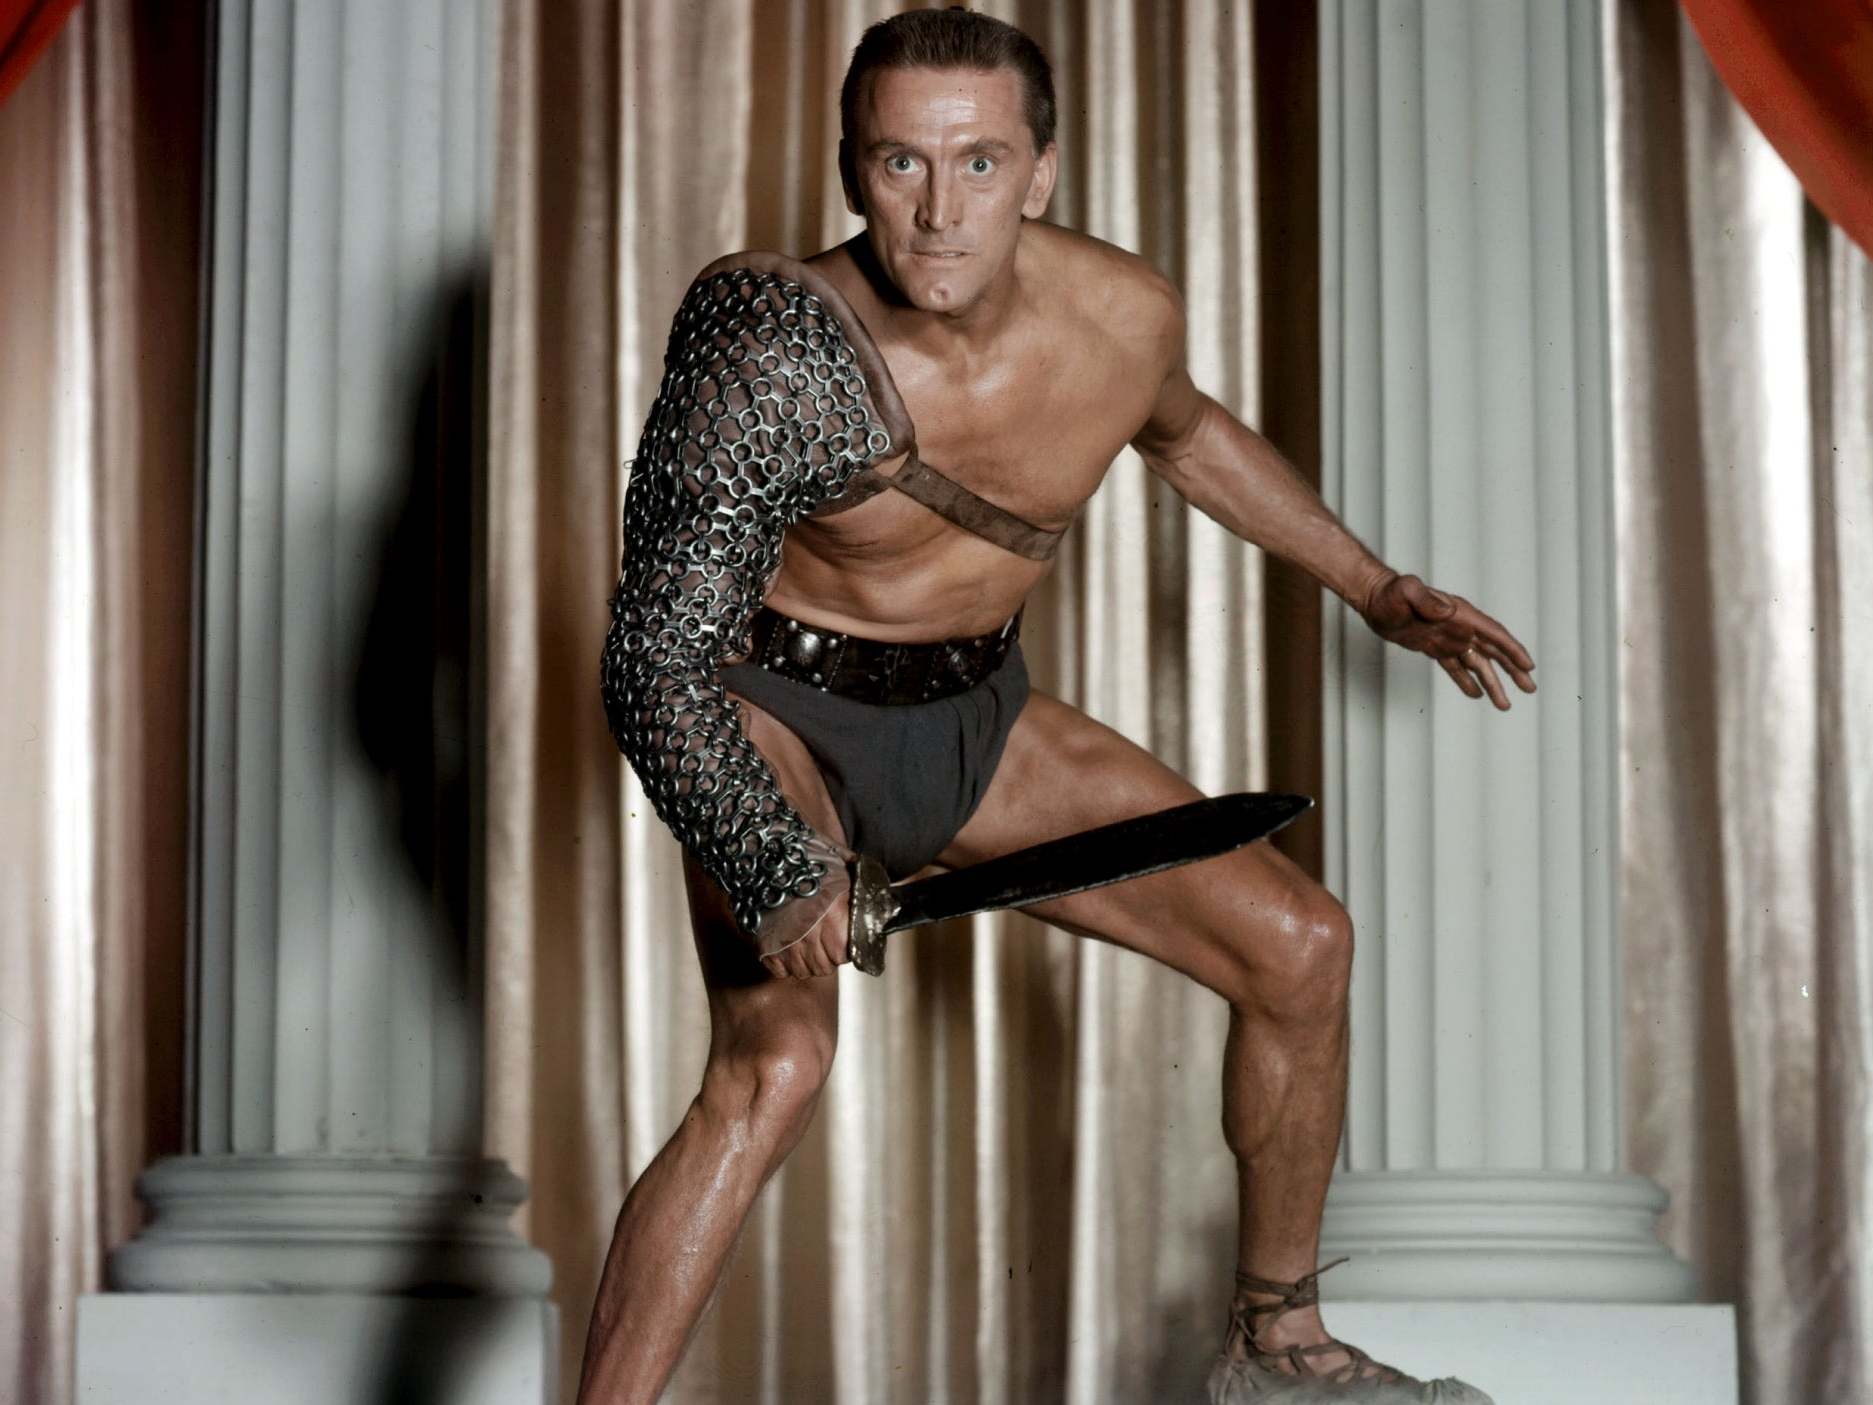 Kirk Douglas in the title role of ‘Spartacus’ (1960), Lewis’s first production credit